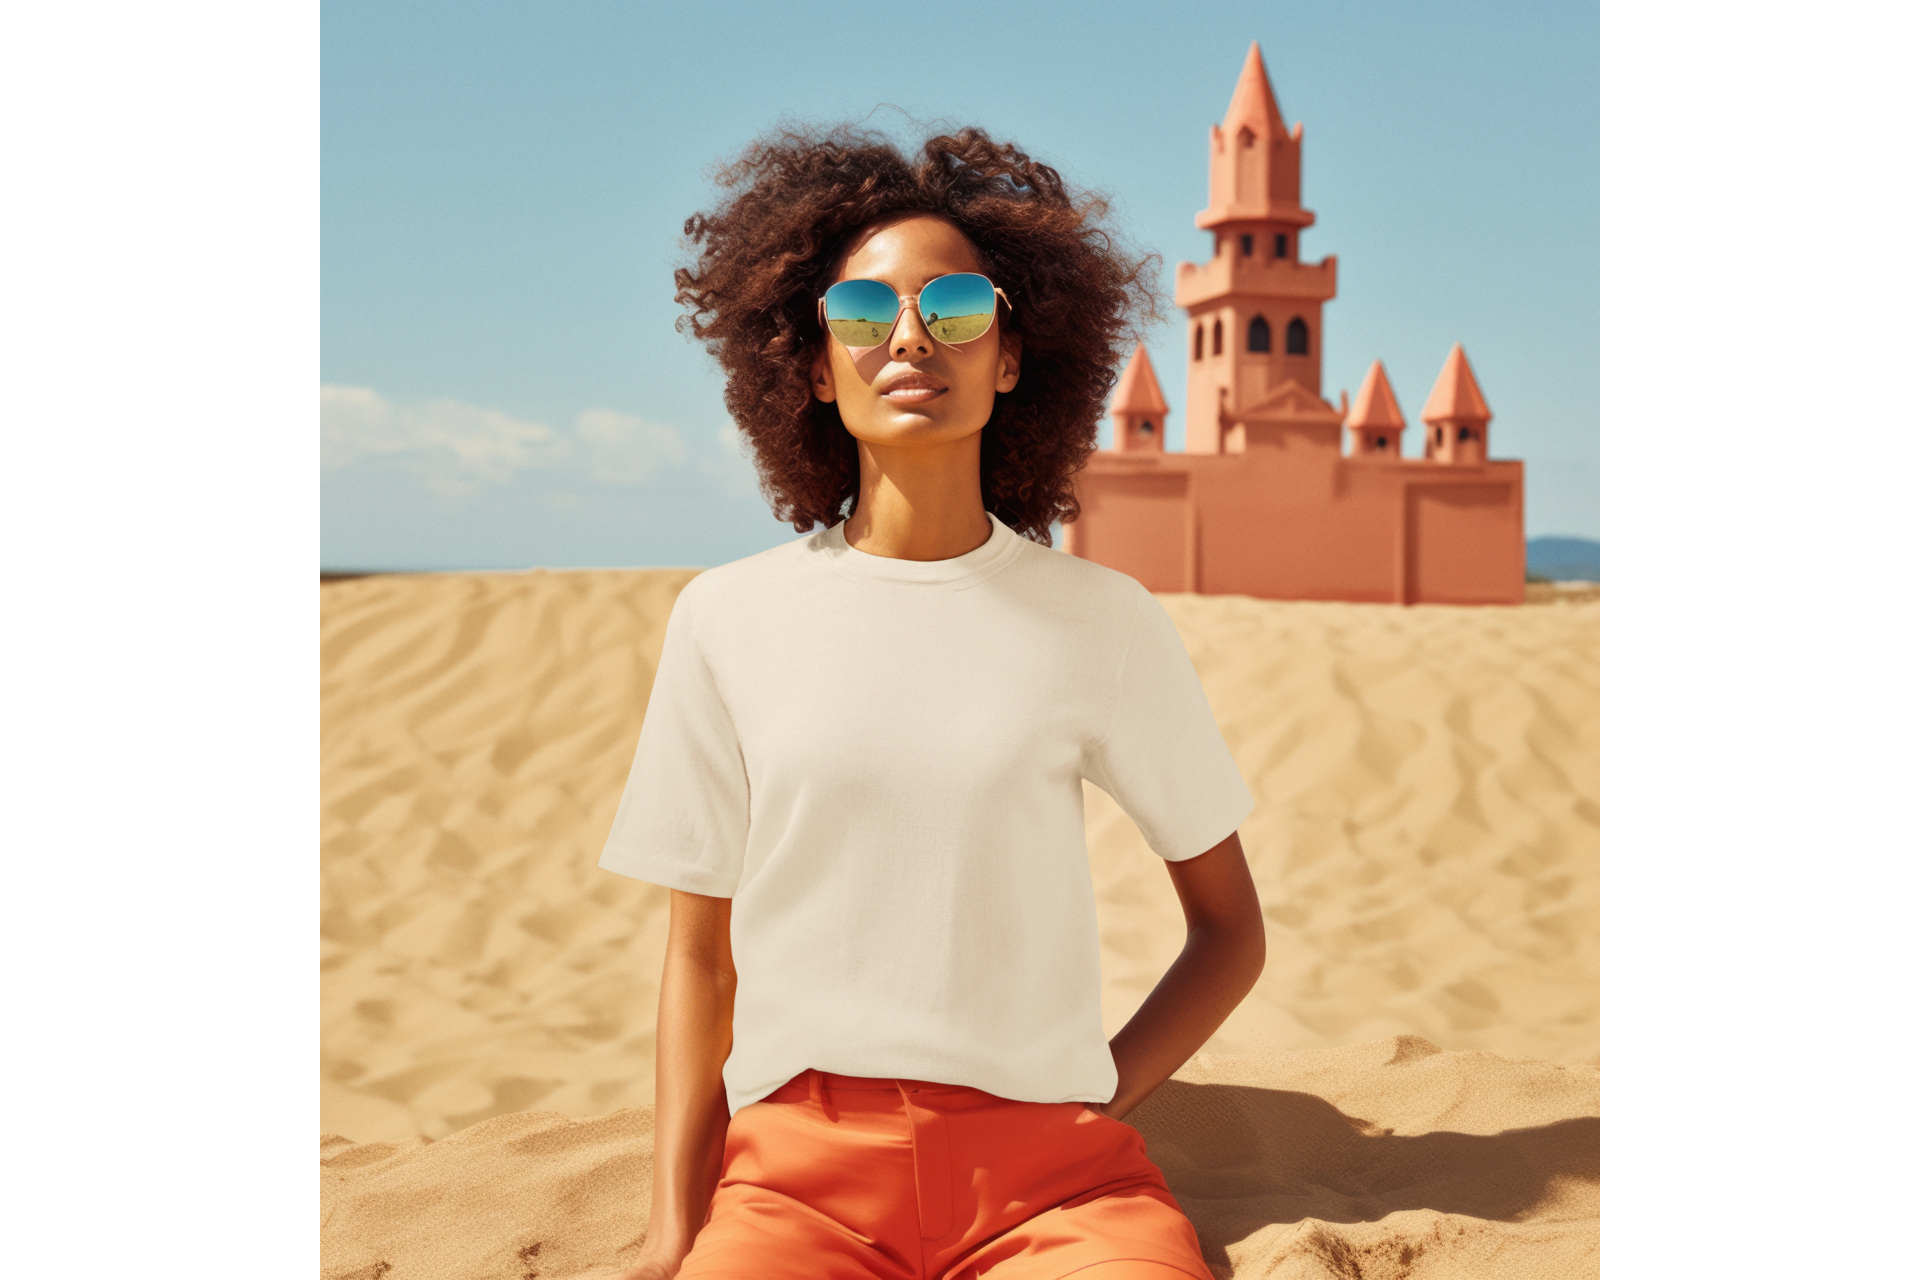 Woman in white t-shirt stood in front of sand castle